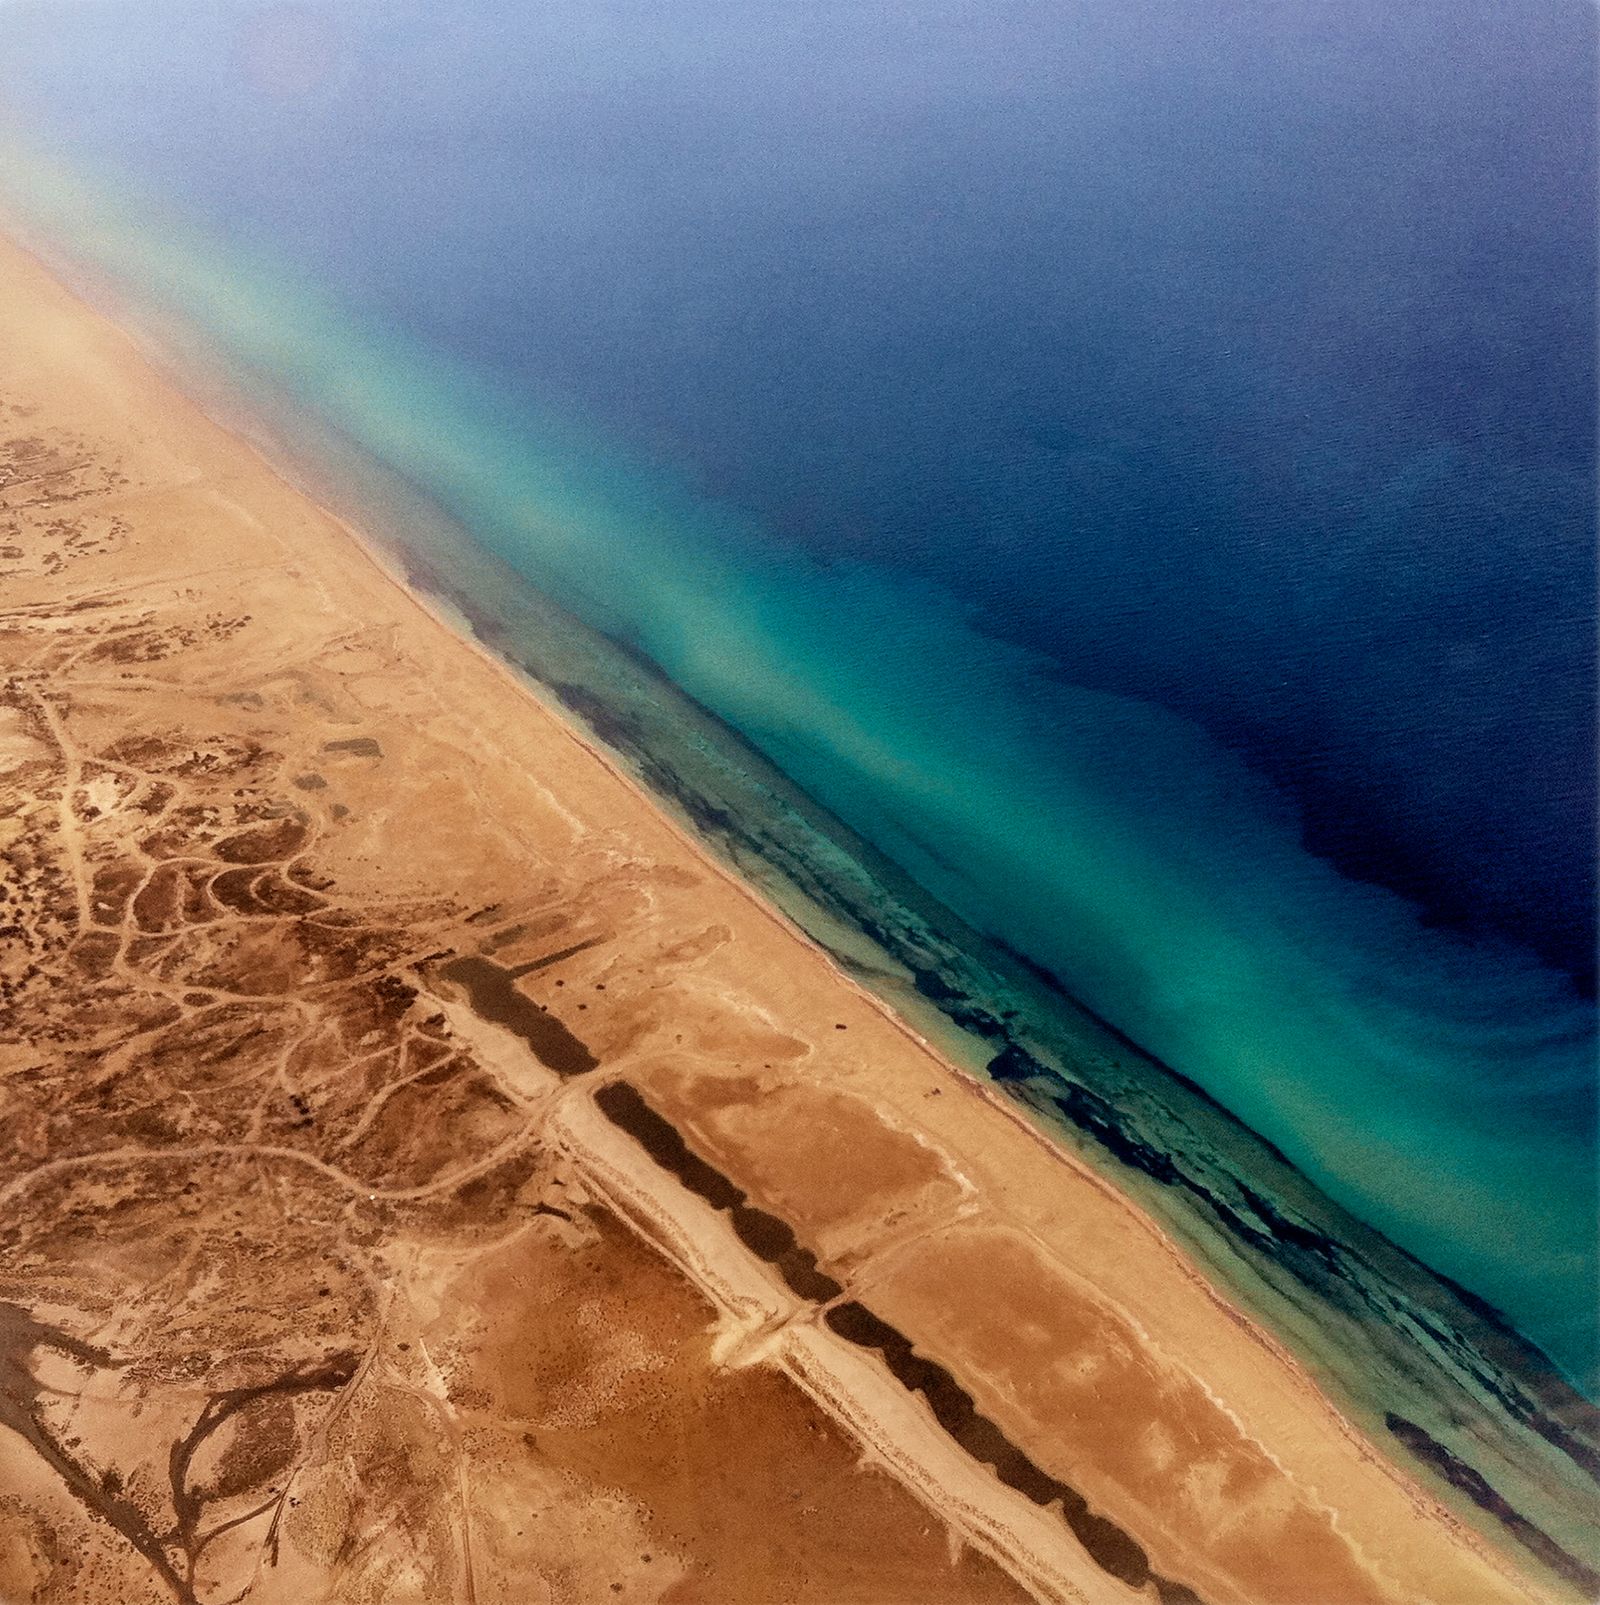 © Michael Christopher Brown. Libya. Outskirts of Benghazi. 23 October, 2011. 13:11:32. Taken from a commercial airplane.